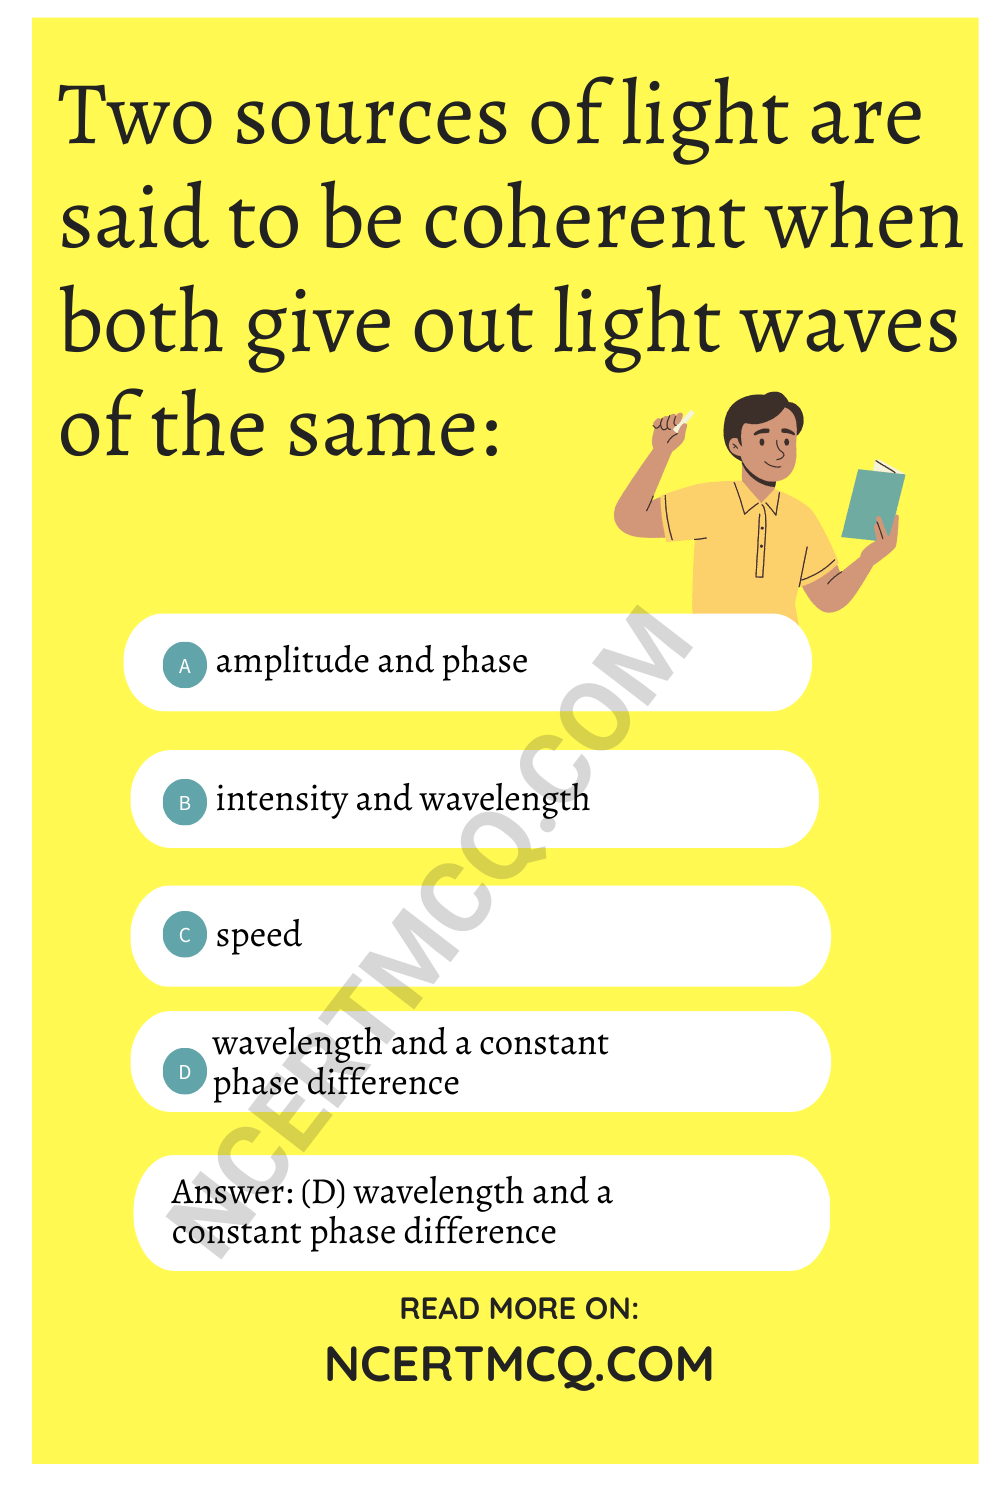 Two sources of light are said to be coherent when both give out light waves of the same: